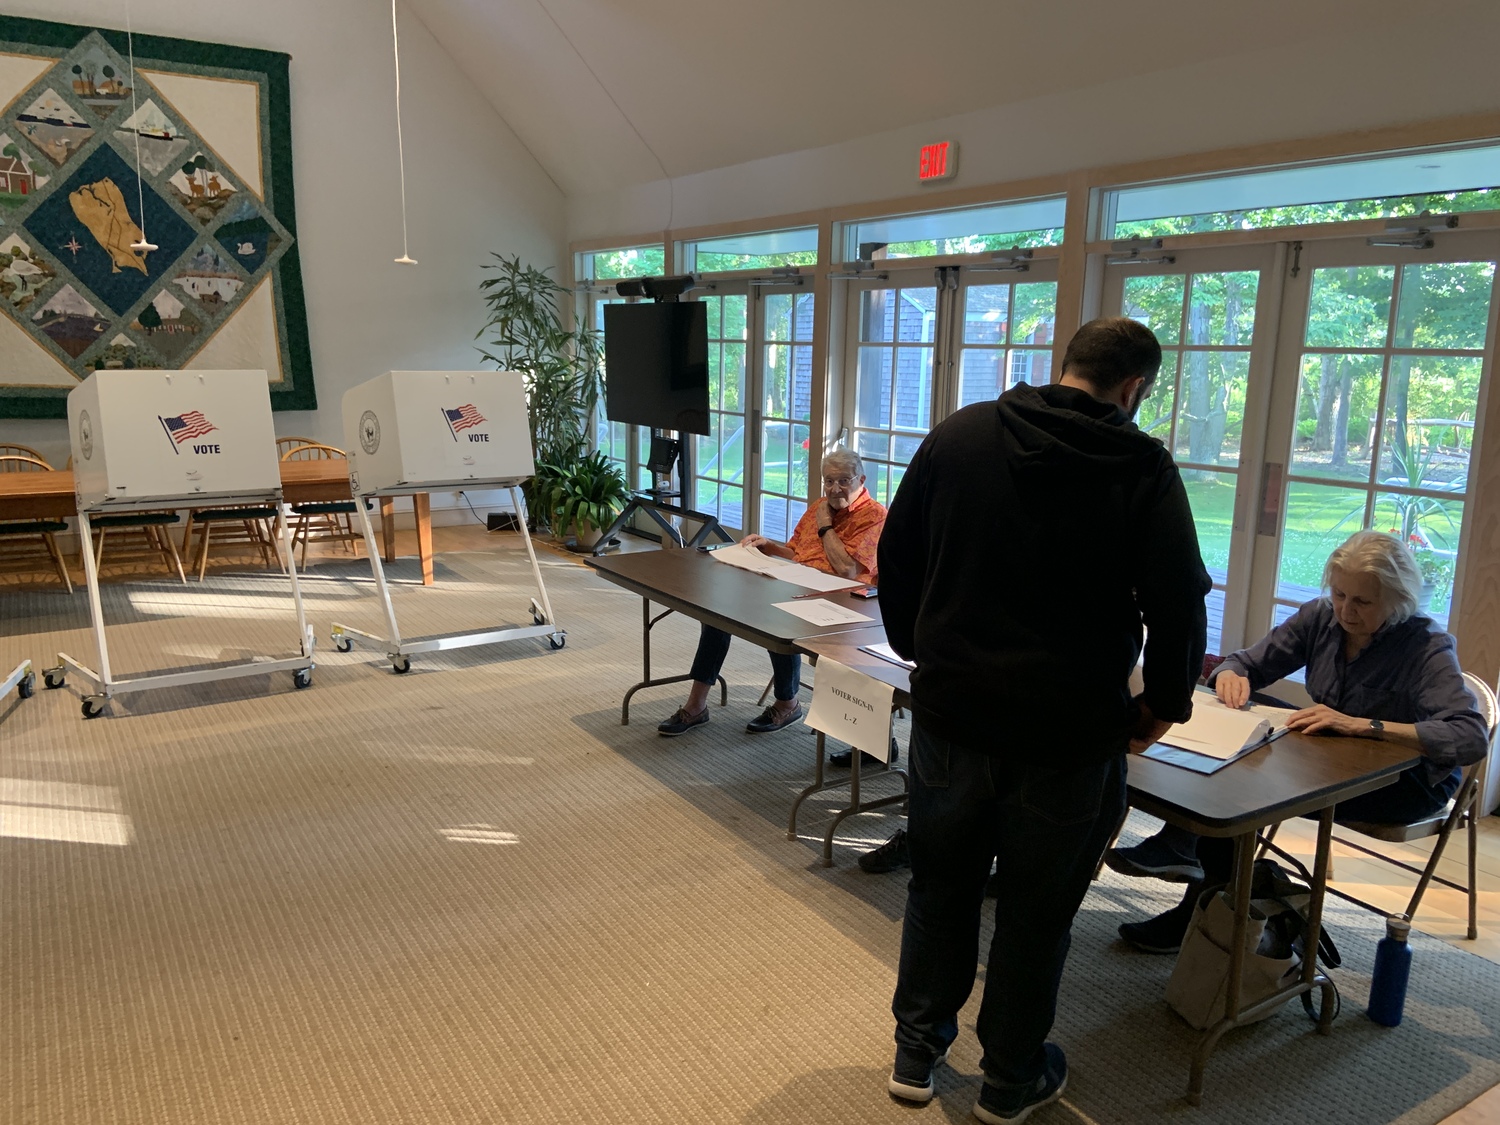 A voter checked into the polling place in North Haven  on Tuesday afternoon. STEPHEN J. KOTZ